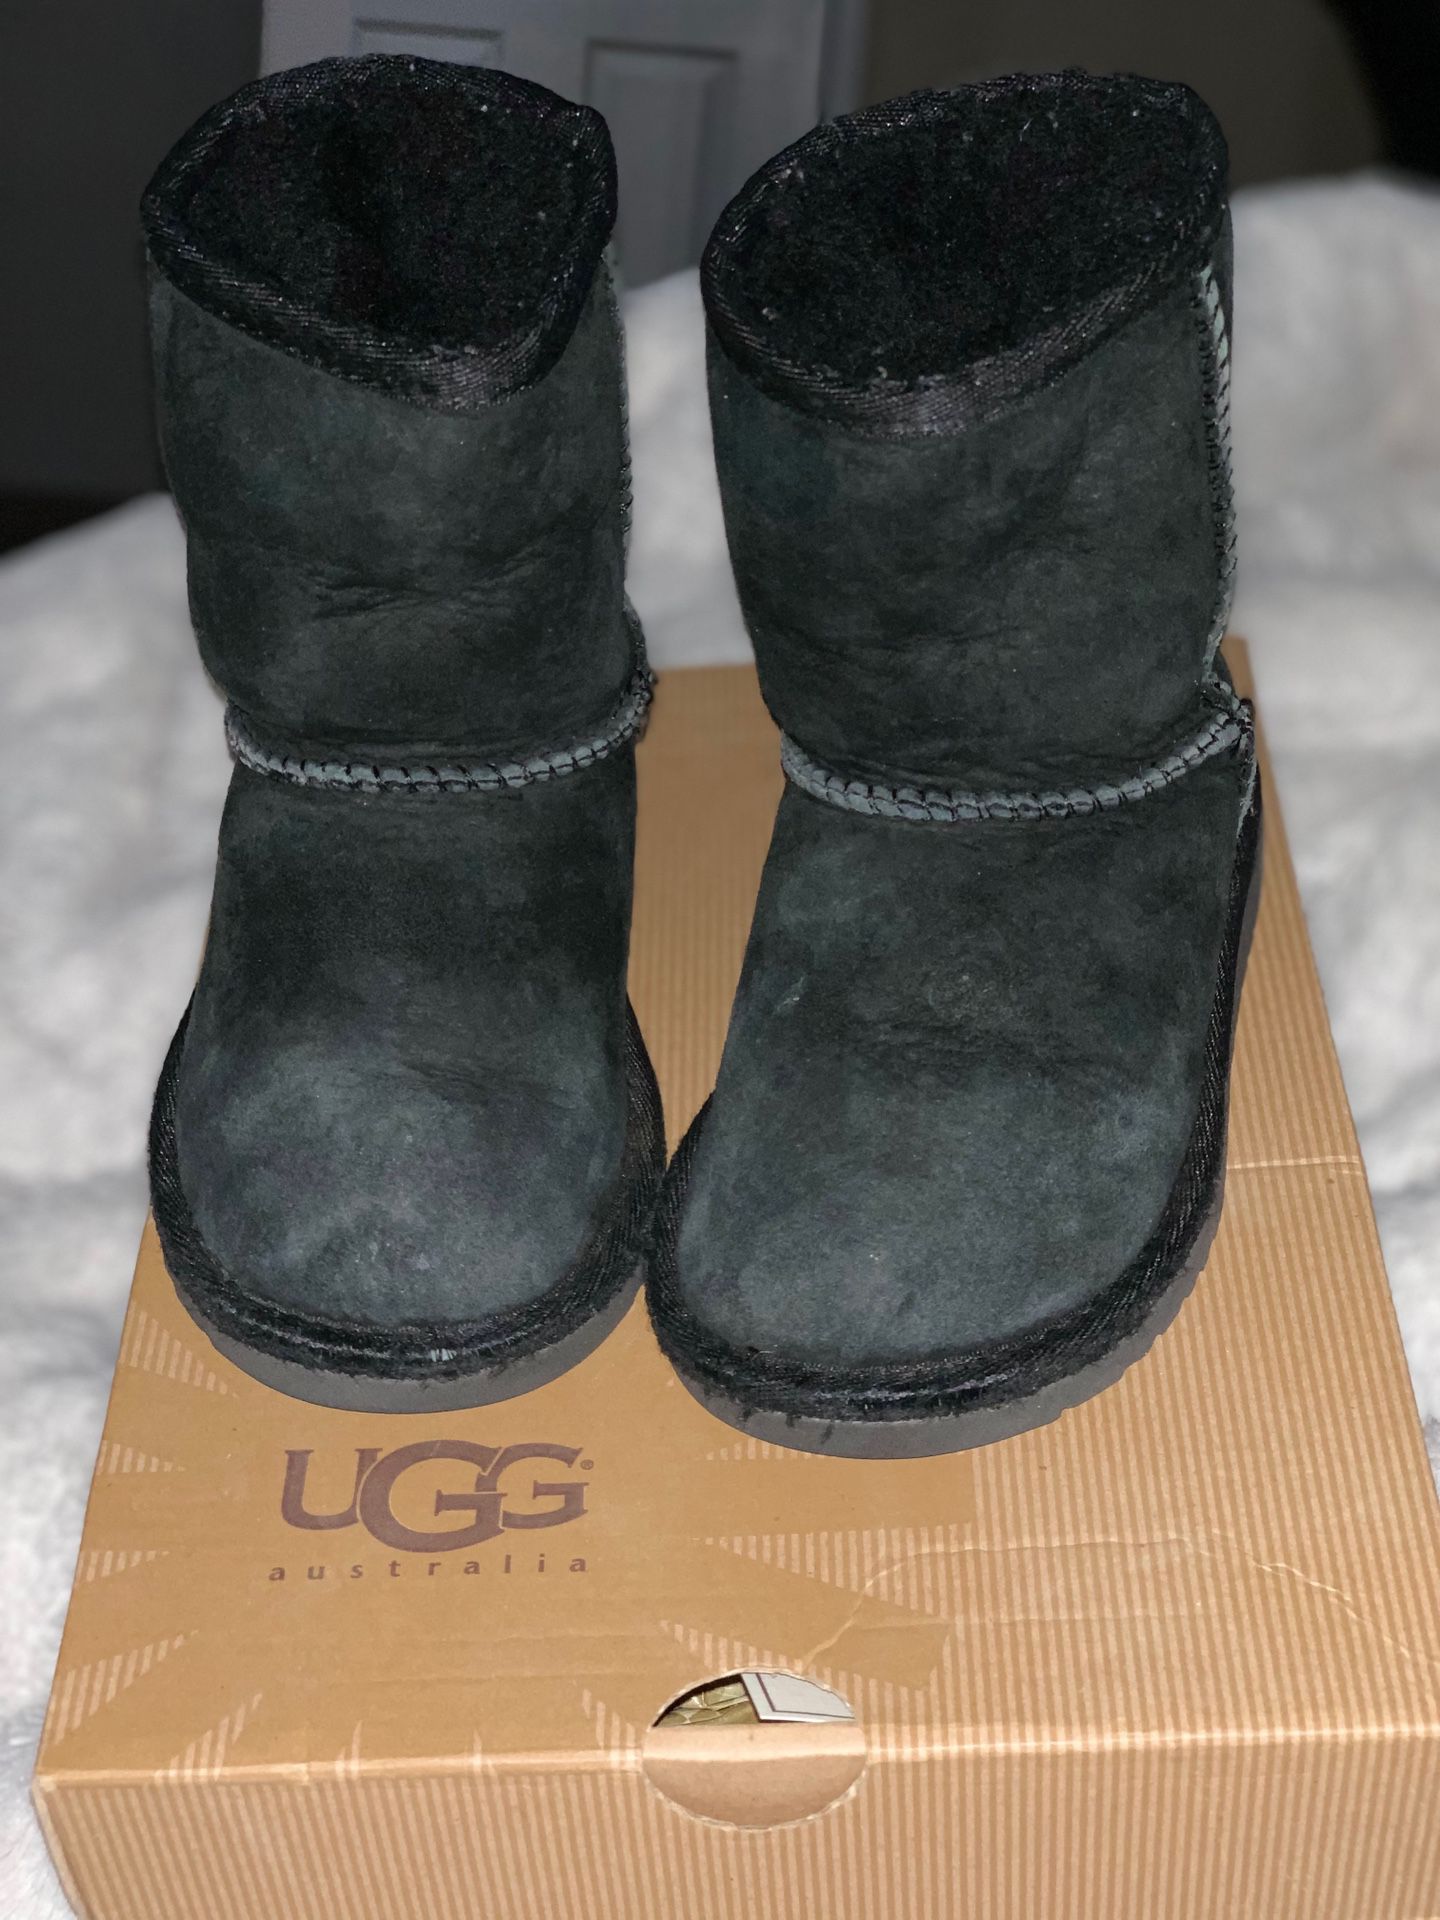 Toddler Uggs boots